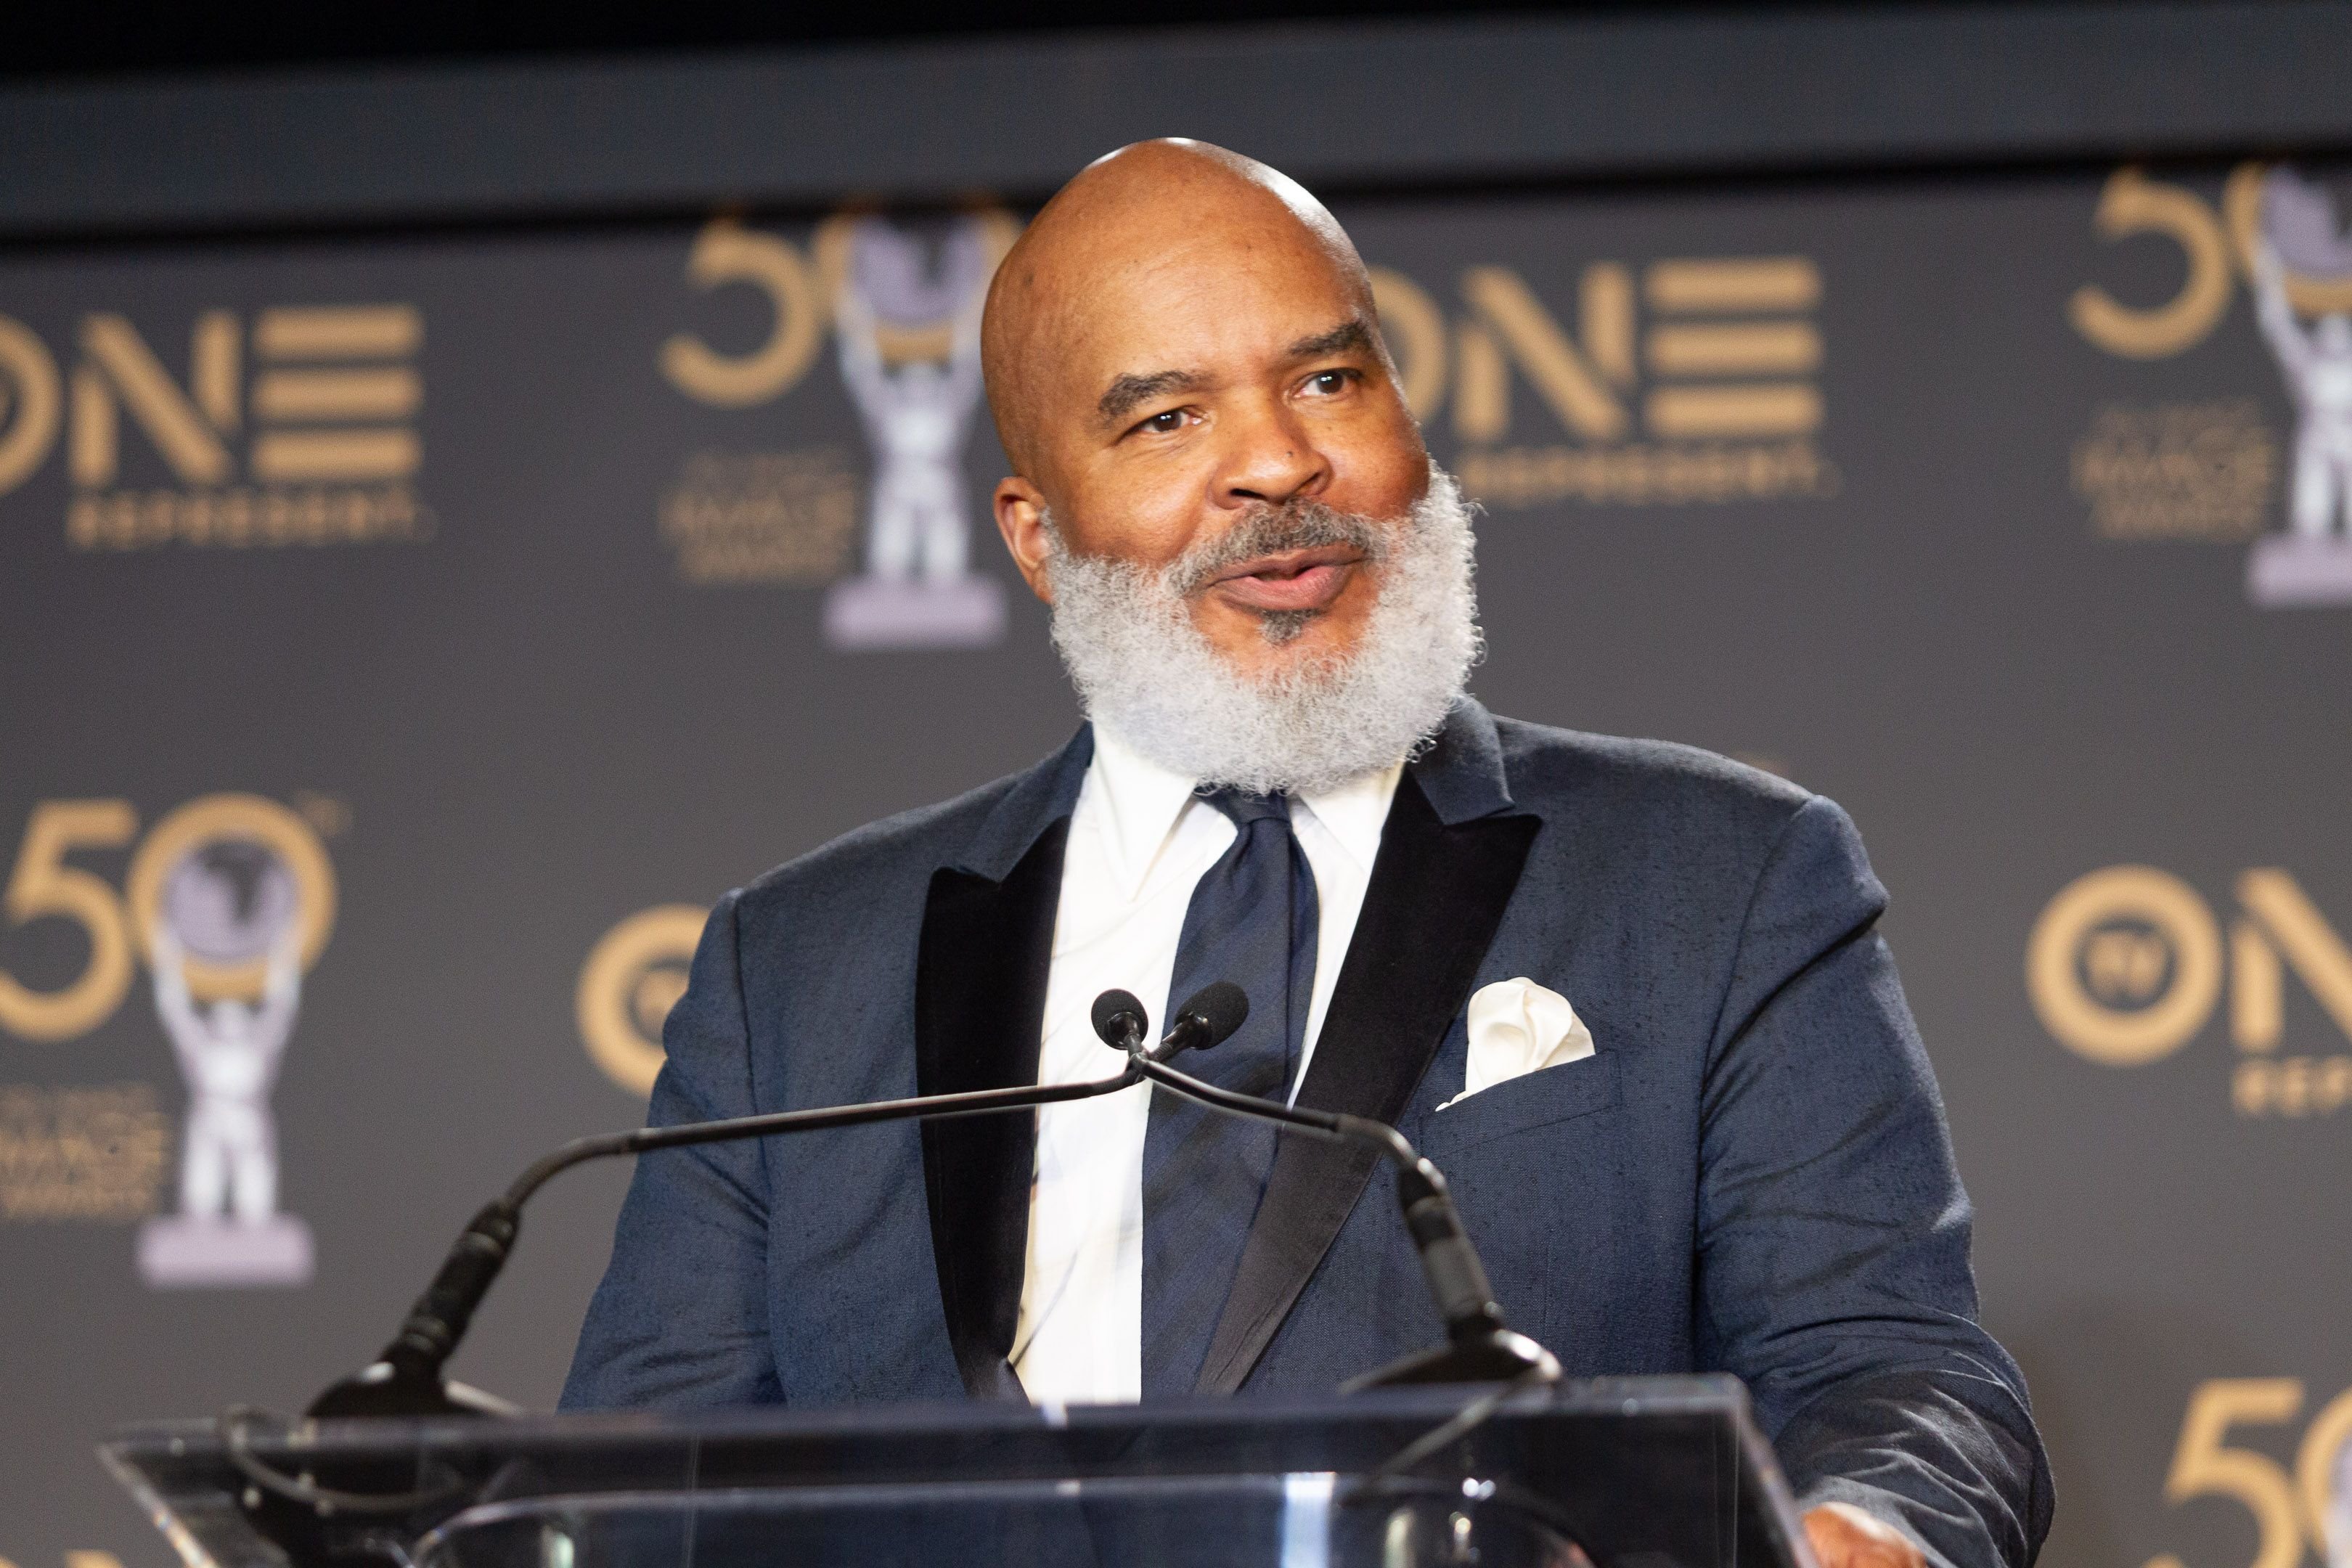 David Alan Grier at the 50th NAACP Image Awards in March 30th 2019 in Hollywood | Source: Shutterstock